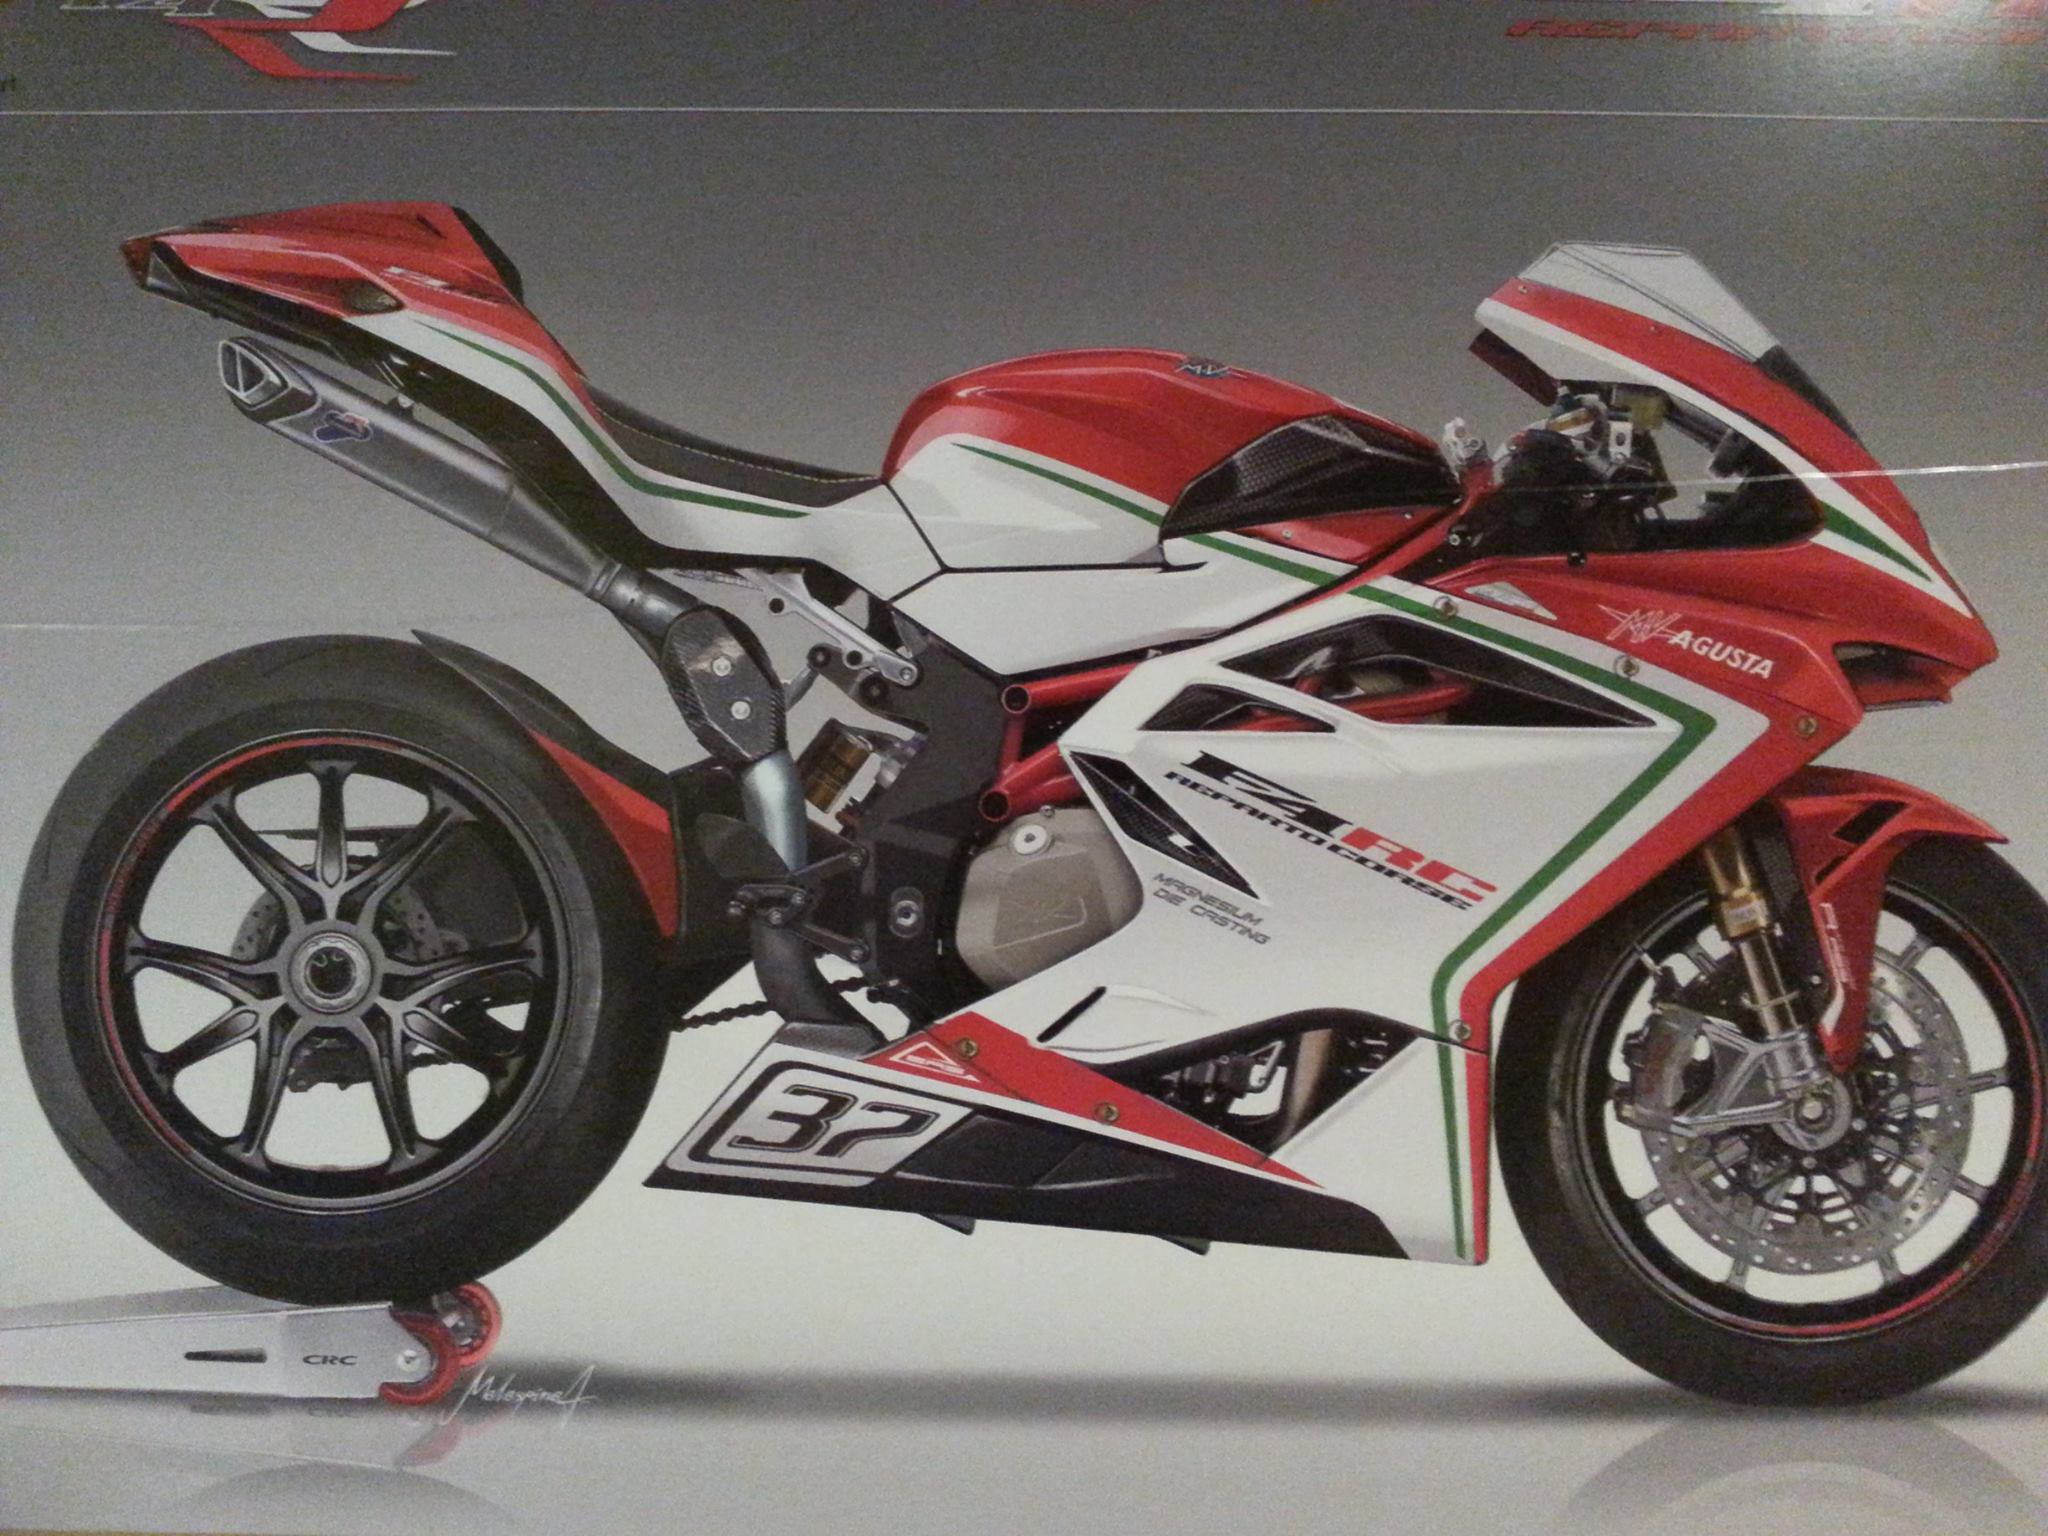 Is this the real MV Agusta F4 RC?